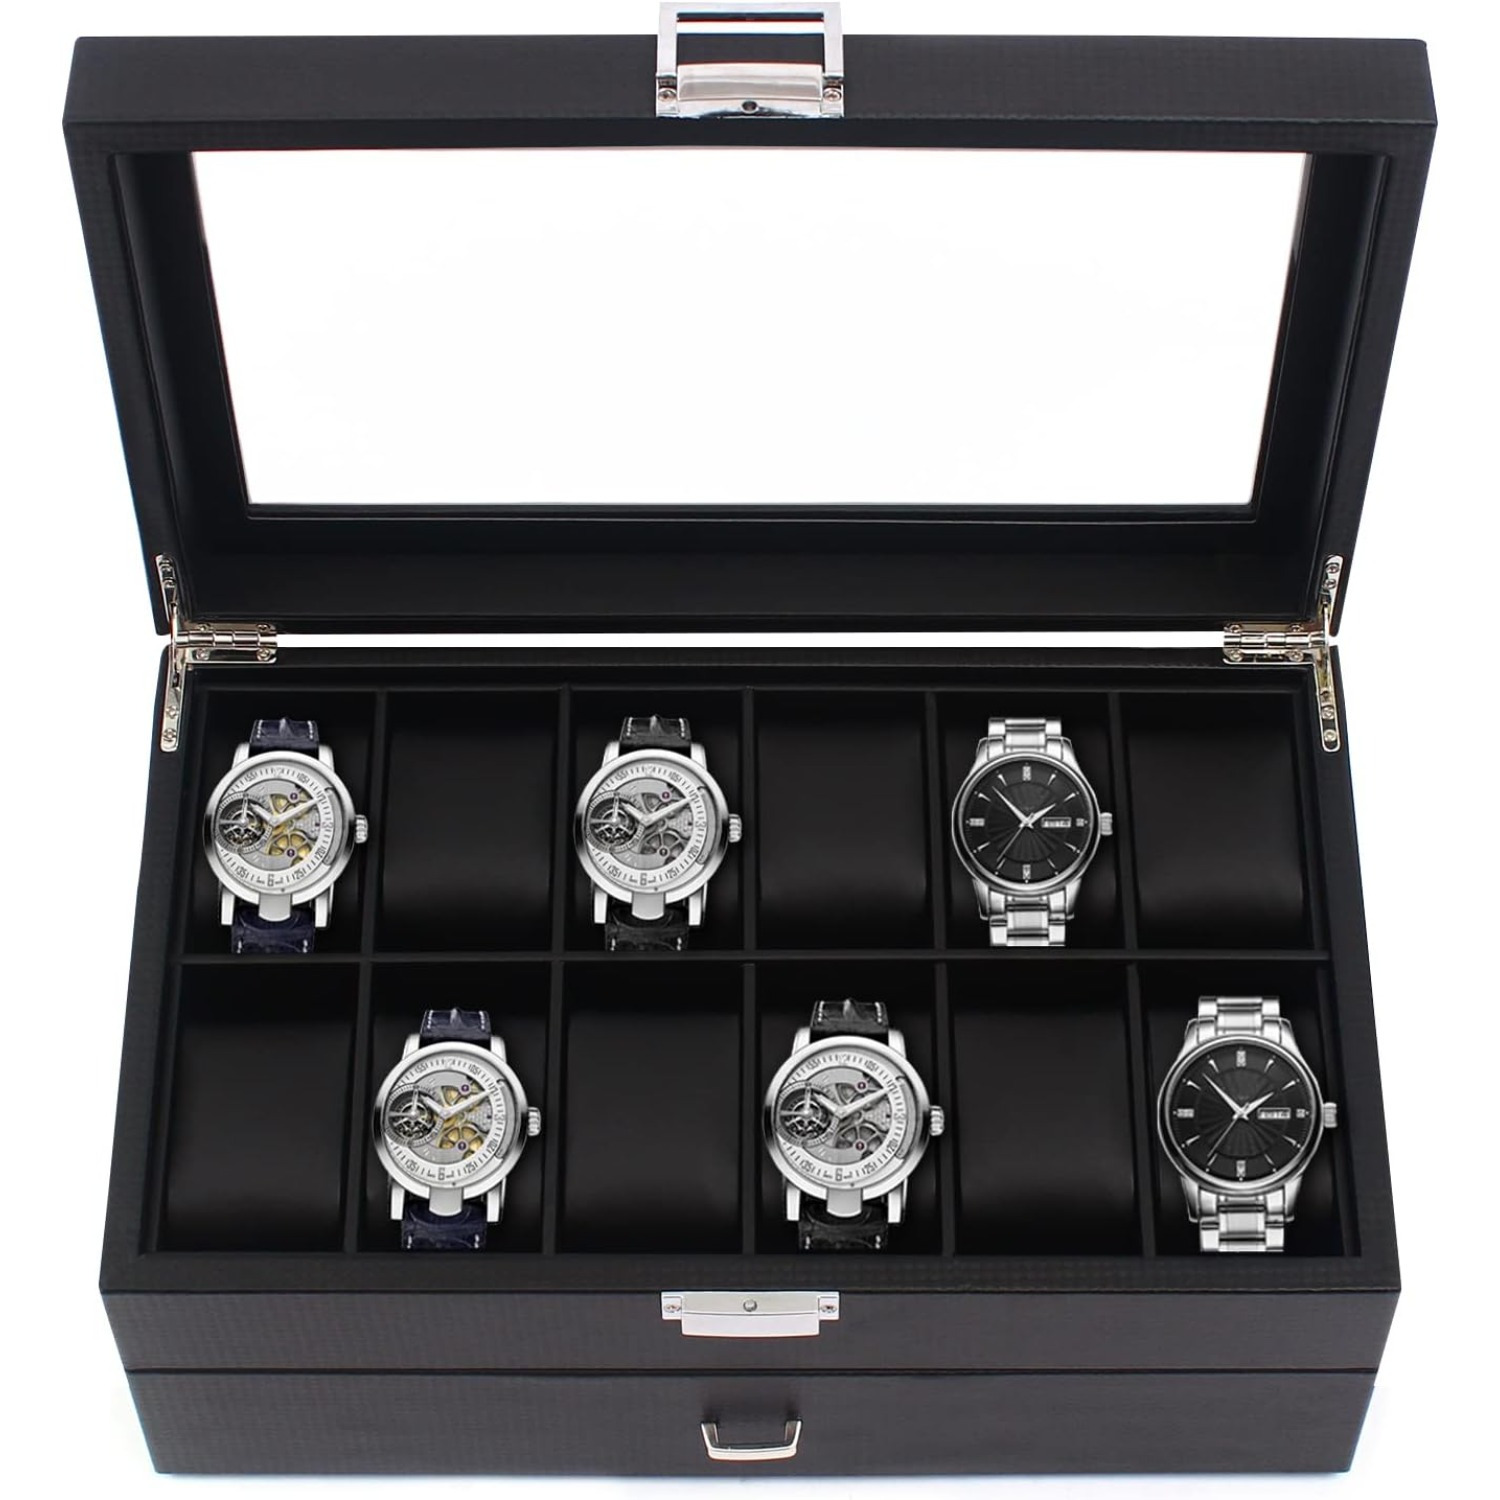 

Watch Box Organizer For Men, 24 Slot Luxurious & Masculine Carbon Fiber Textured Display Case - Real Glass Top, Metal Hinge, Large Watch Holder With Drawer, Black Carbon Fiber Watch Collection Case